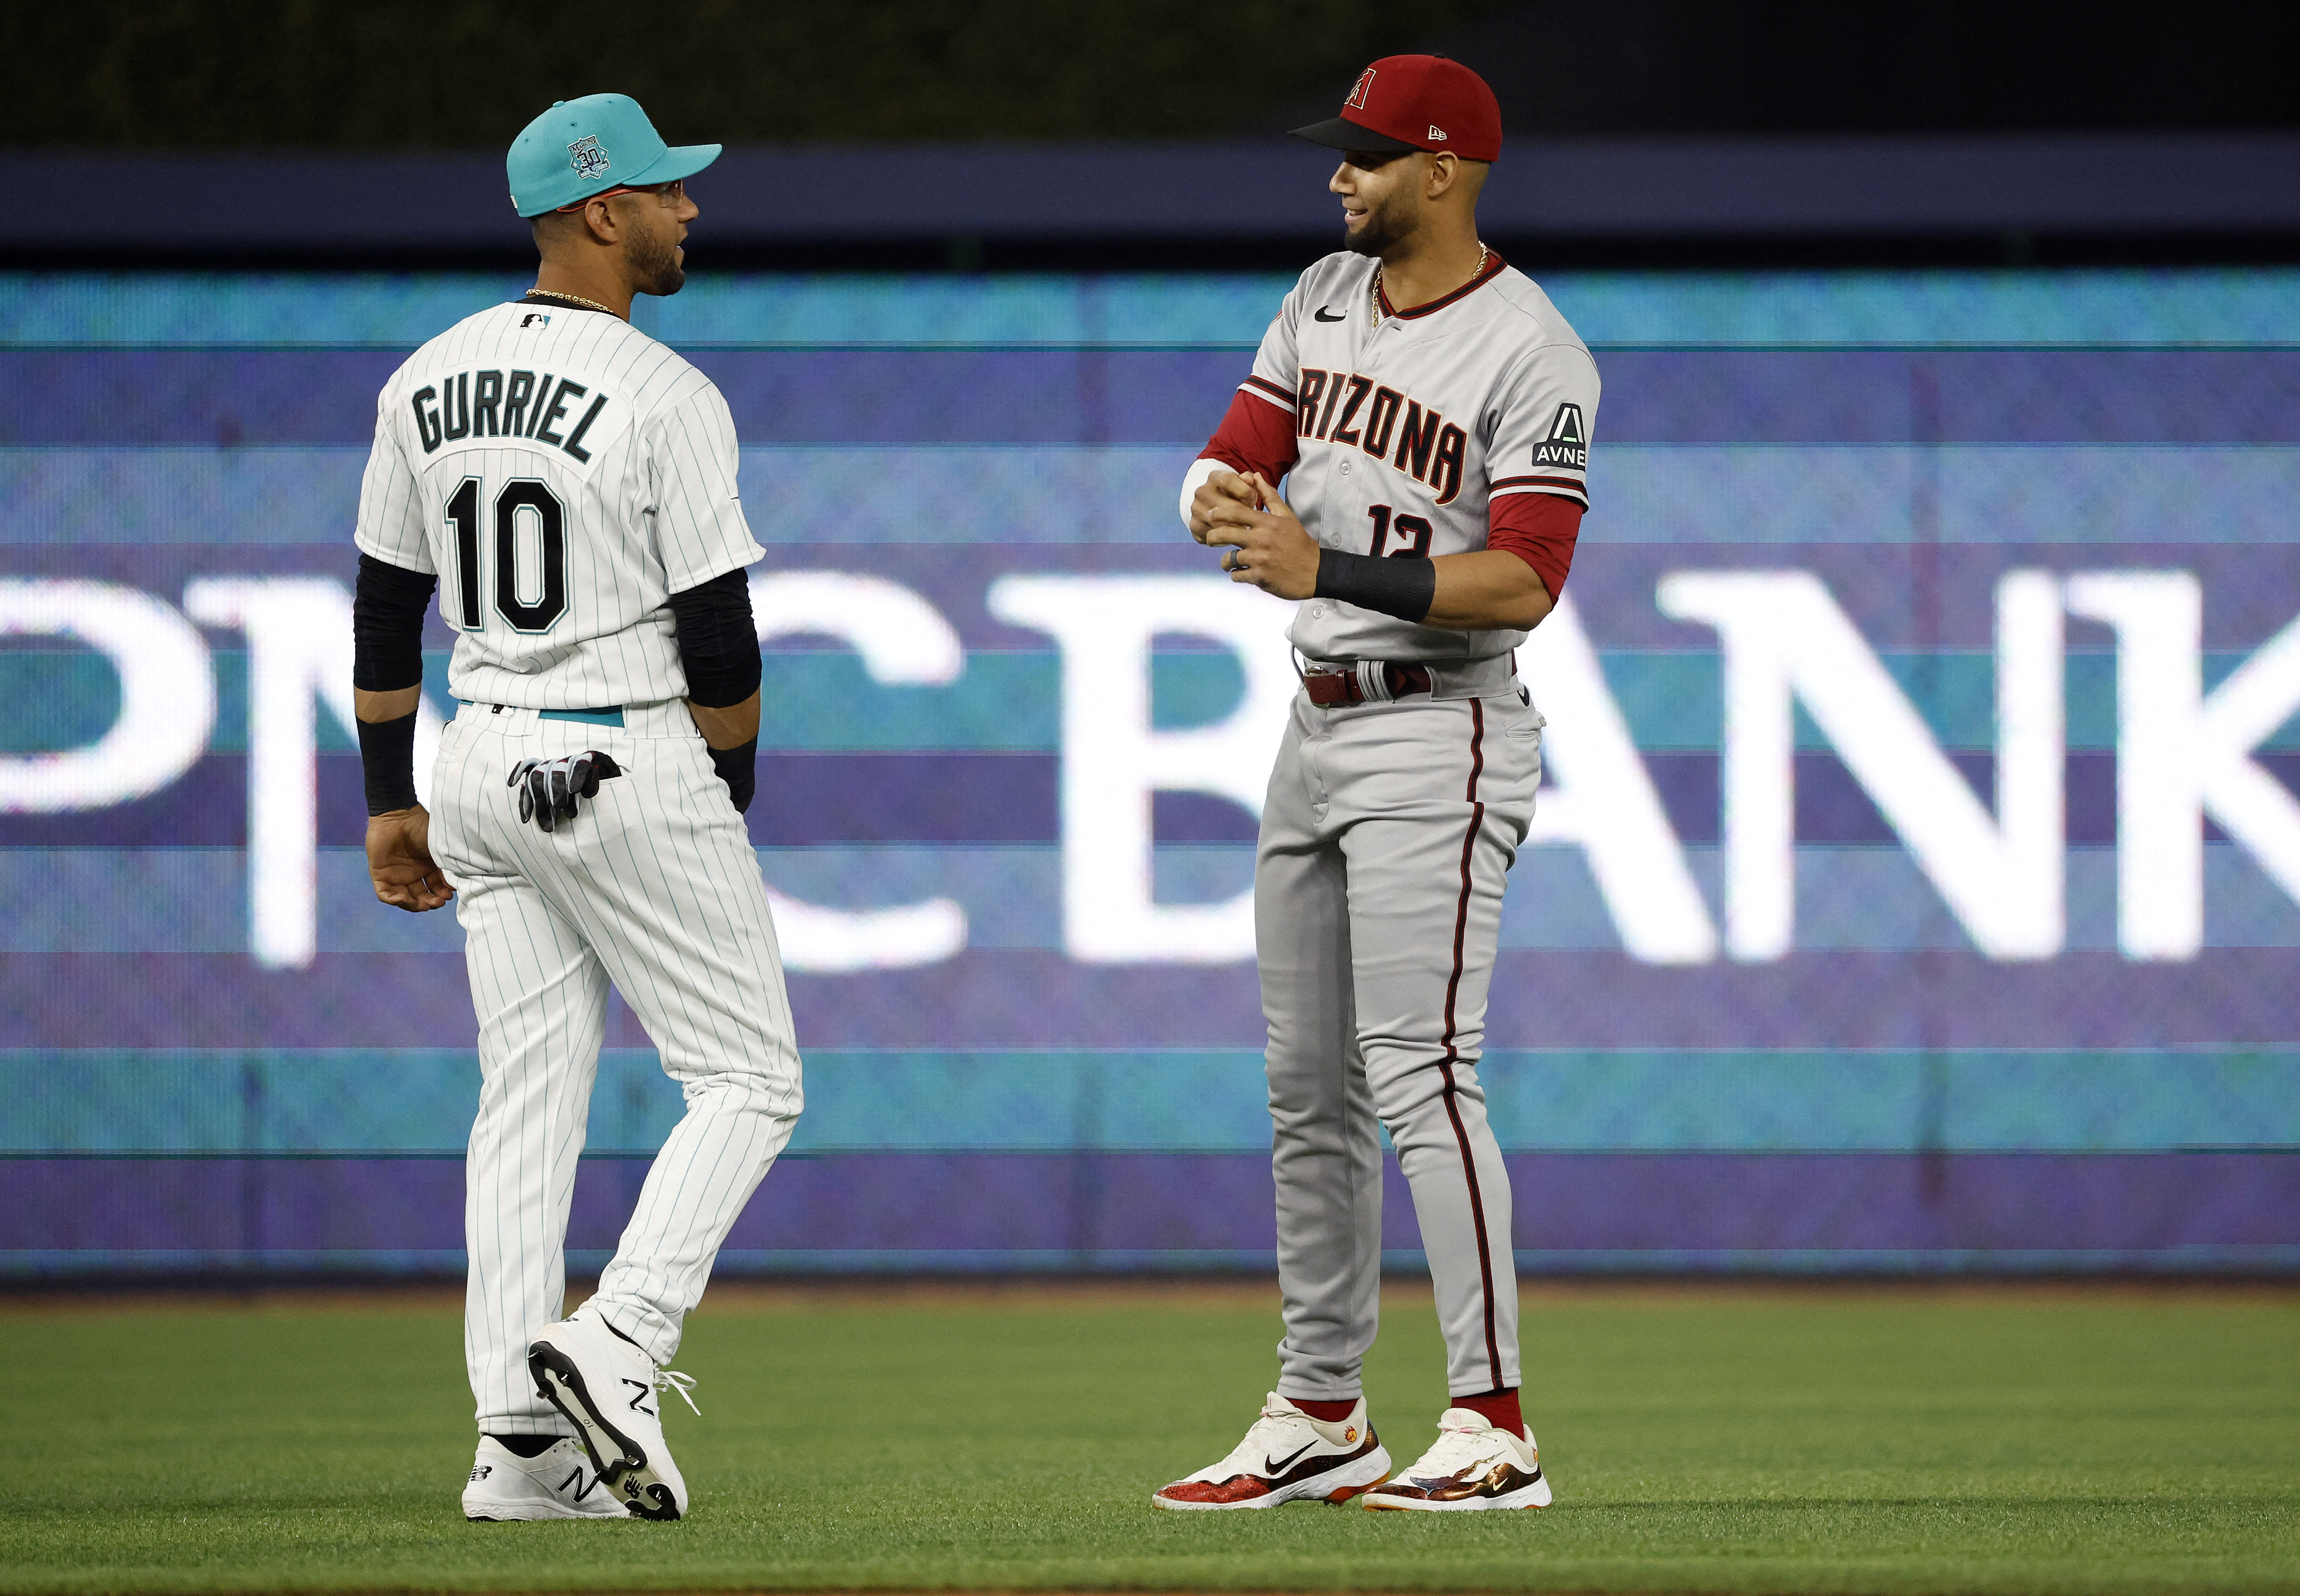 Trevor Rogers ends winless drought as Marlins beat D-backs